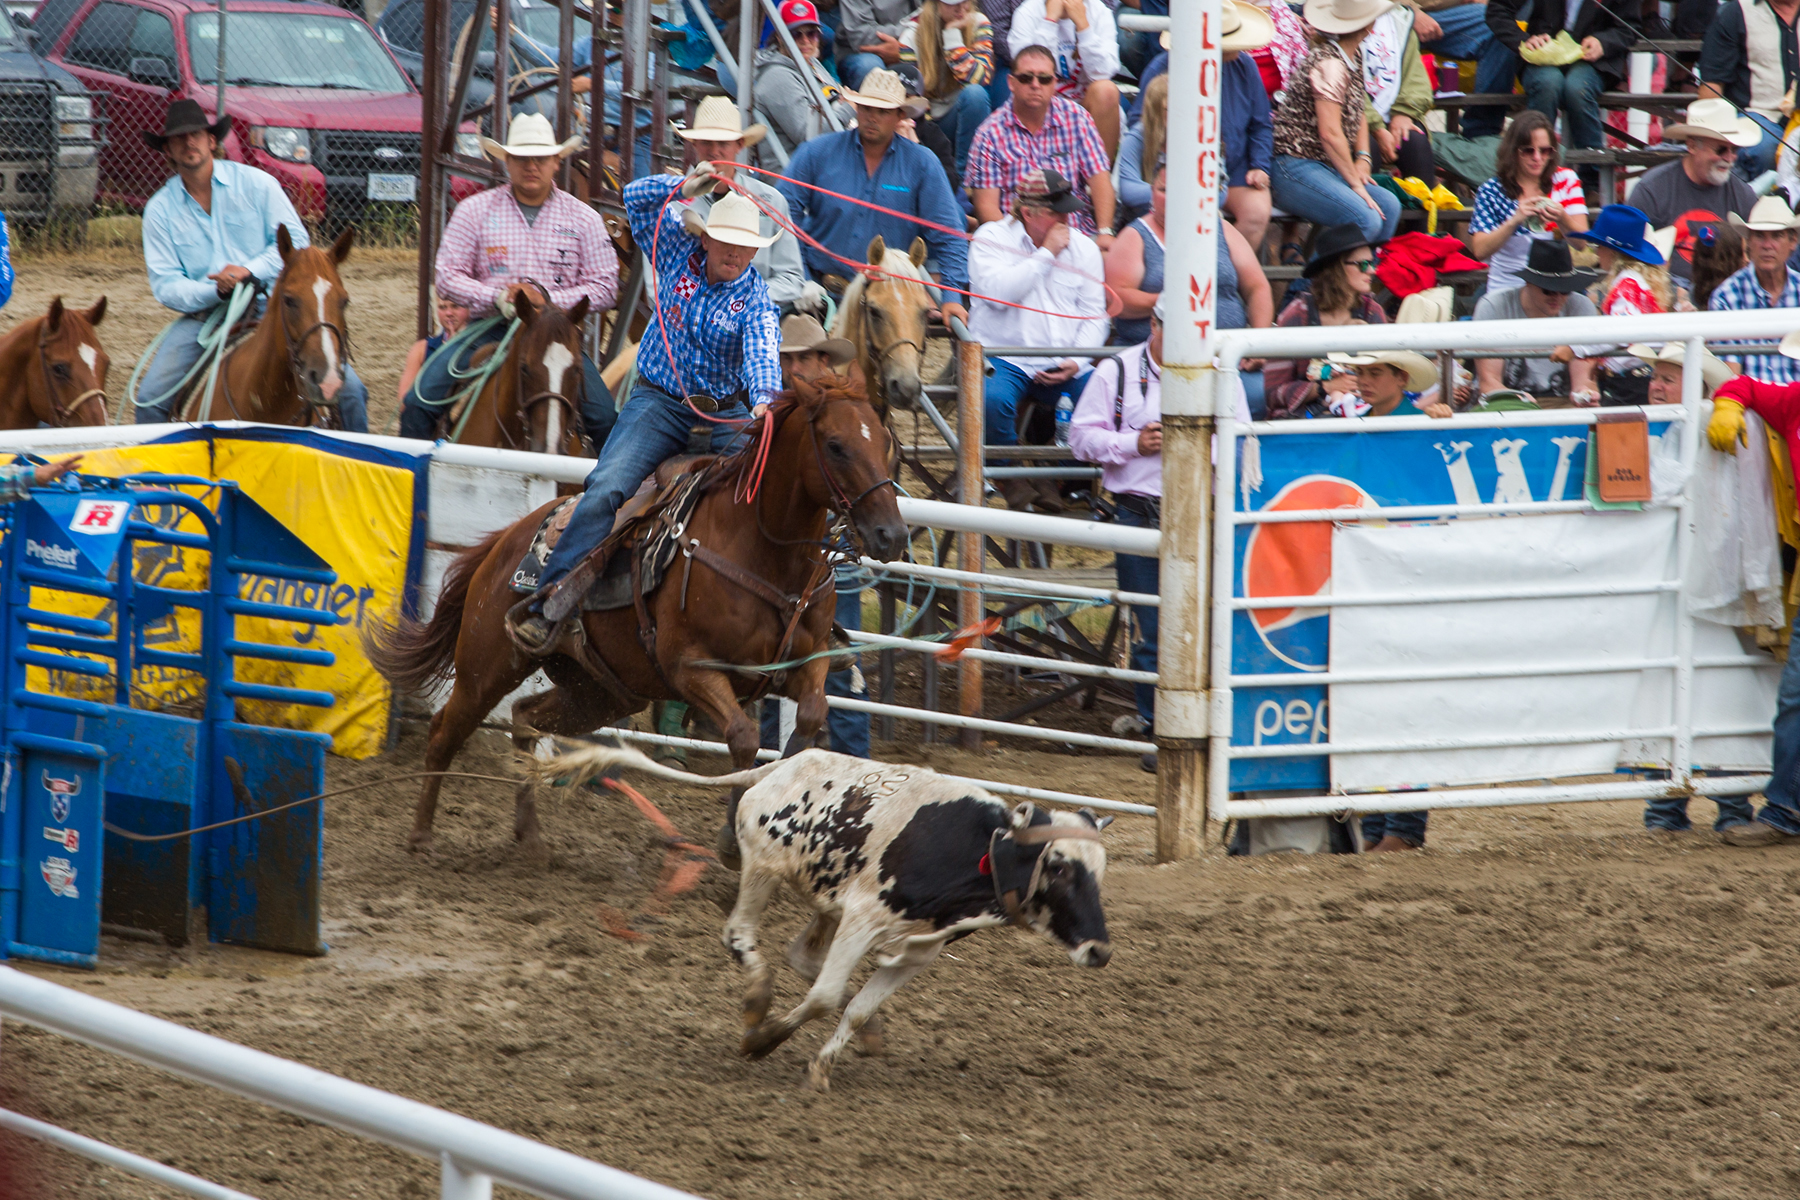 Team roping at Home of Champions Rodeo, Red Lodge, MT, July 4, 2021.  Click for next photo.